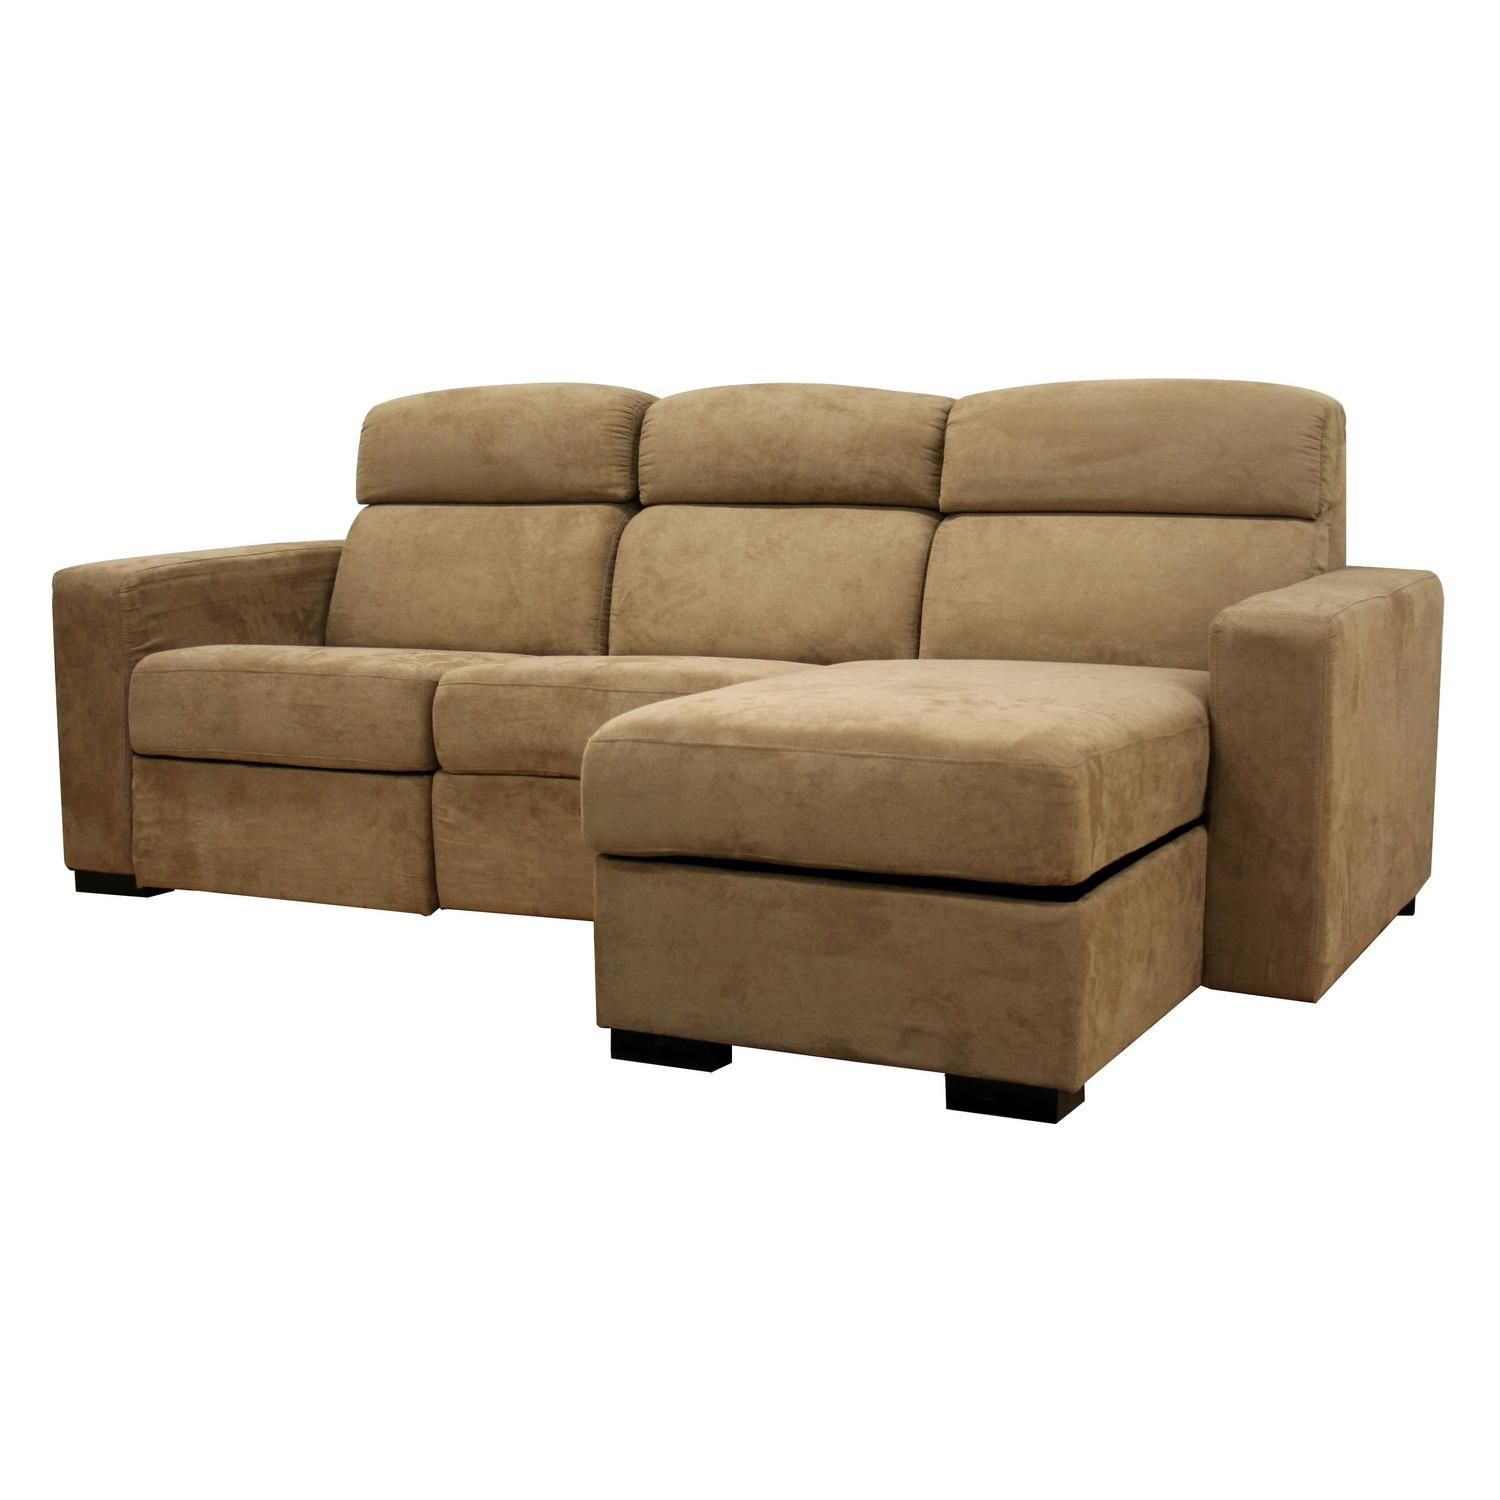 Holcomb Tan Microfiber Storage Chaise And Reclining Inside Copenhagen Reclining Sectional Sofas With Right Storage Chaise (View 6 of 15)